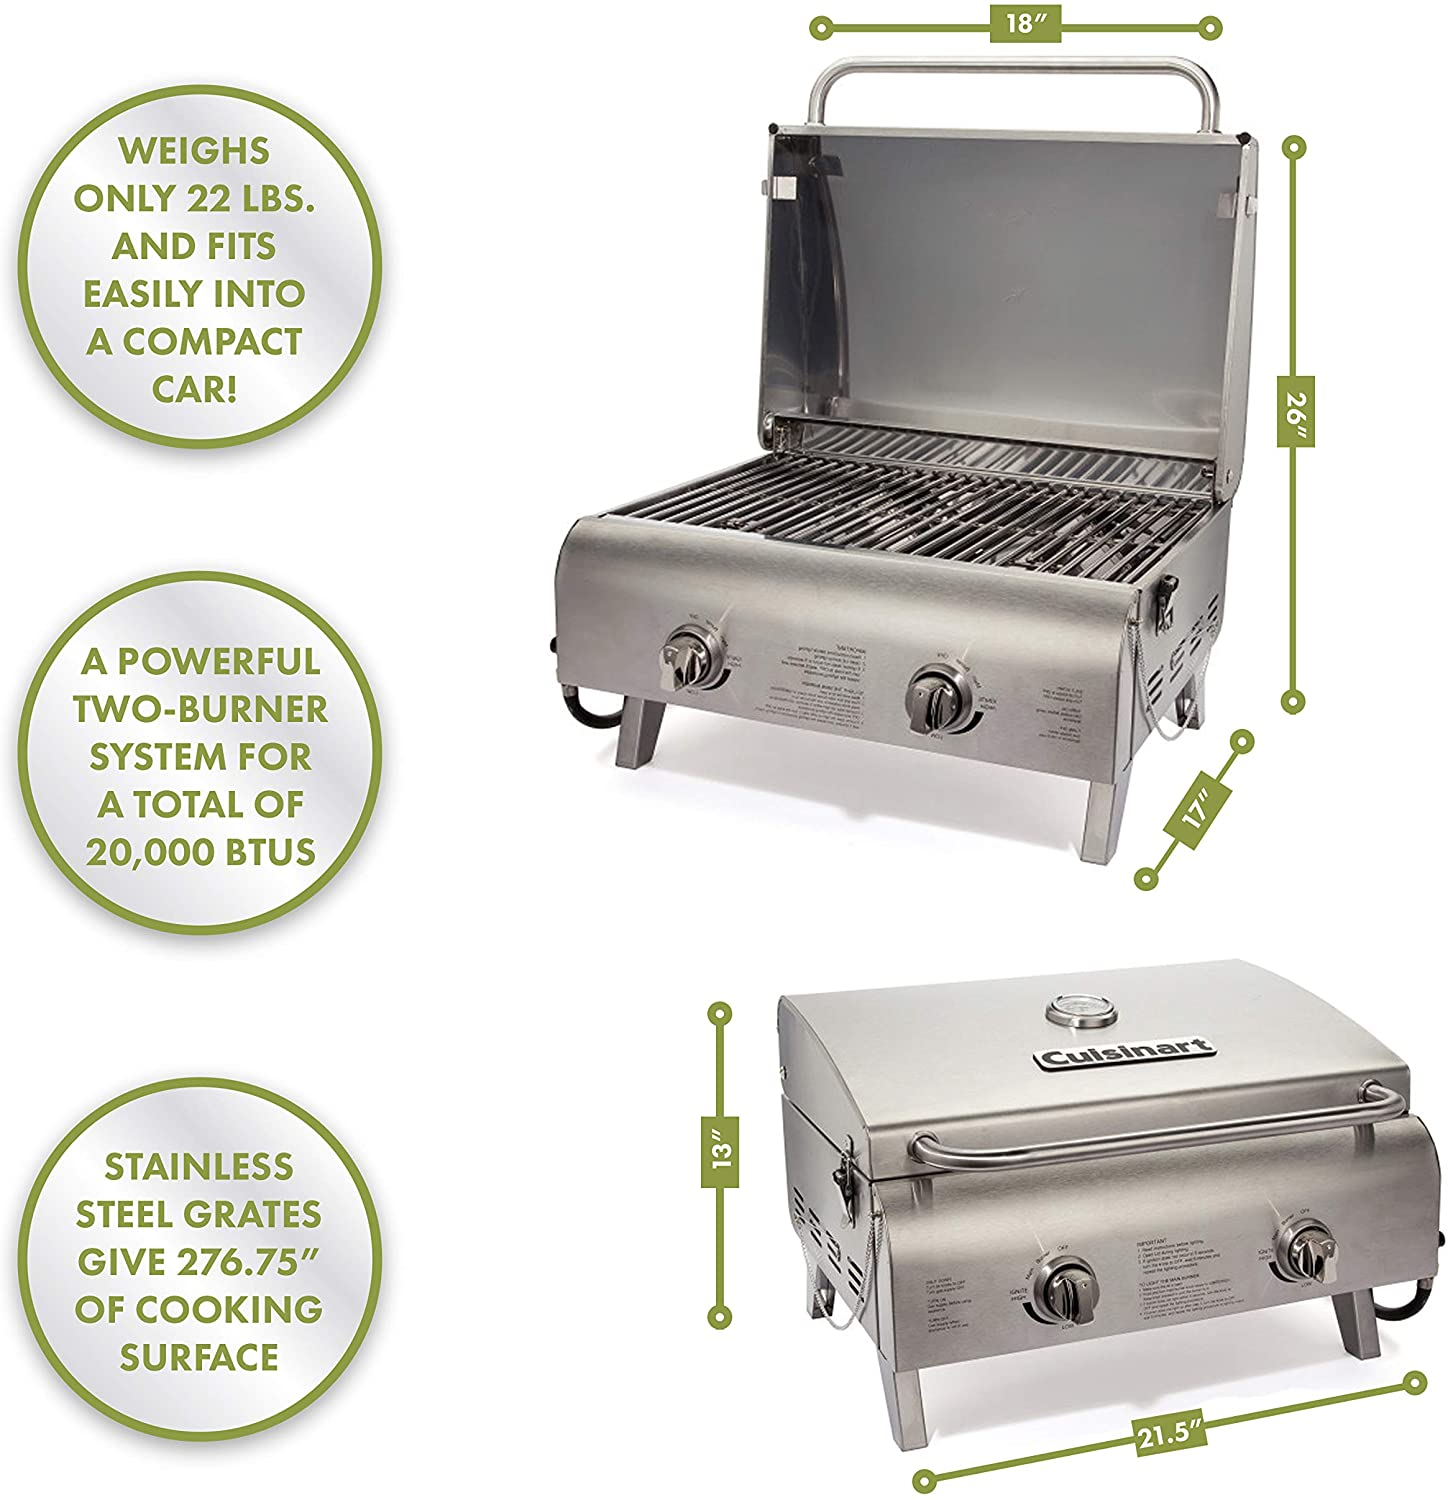 Cuisinart CGG-306 Chef's Style Propane Tabletop Grill, Two-Burner, Stainless Steel - image 3 of 3